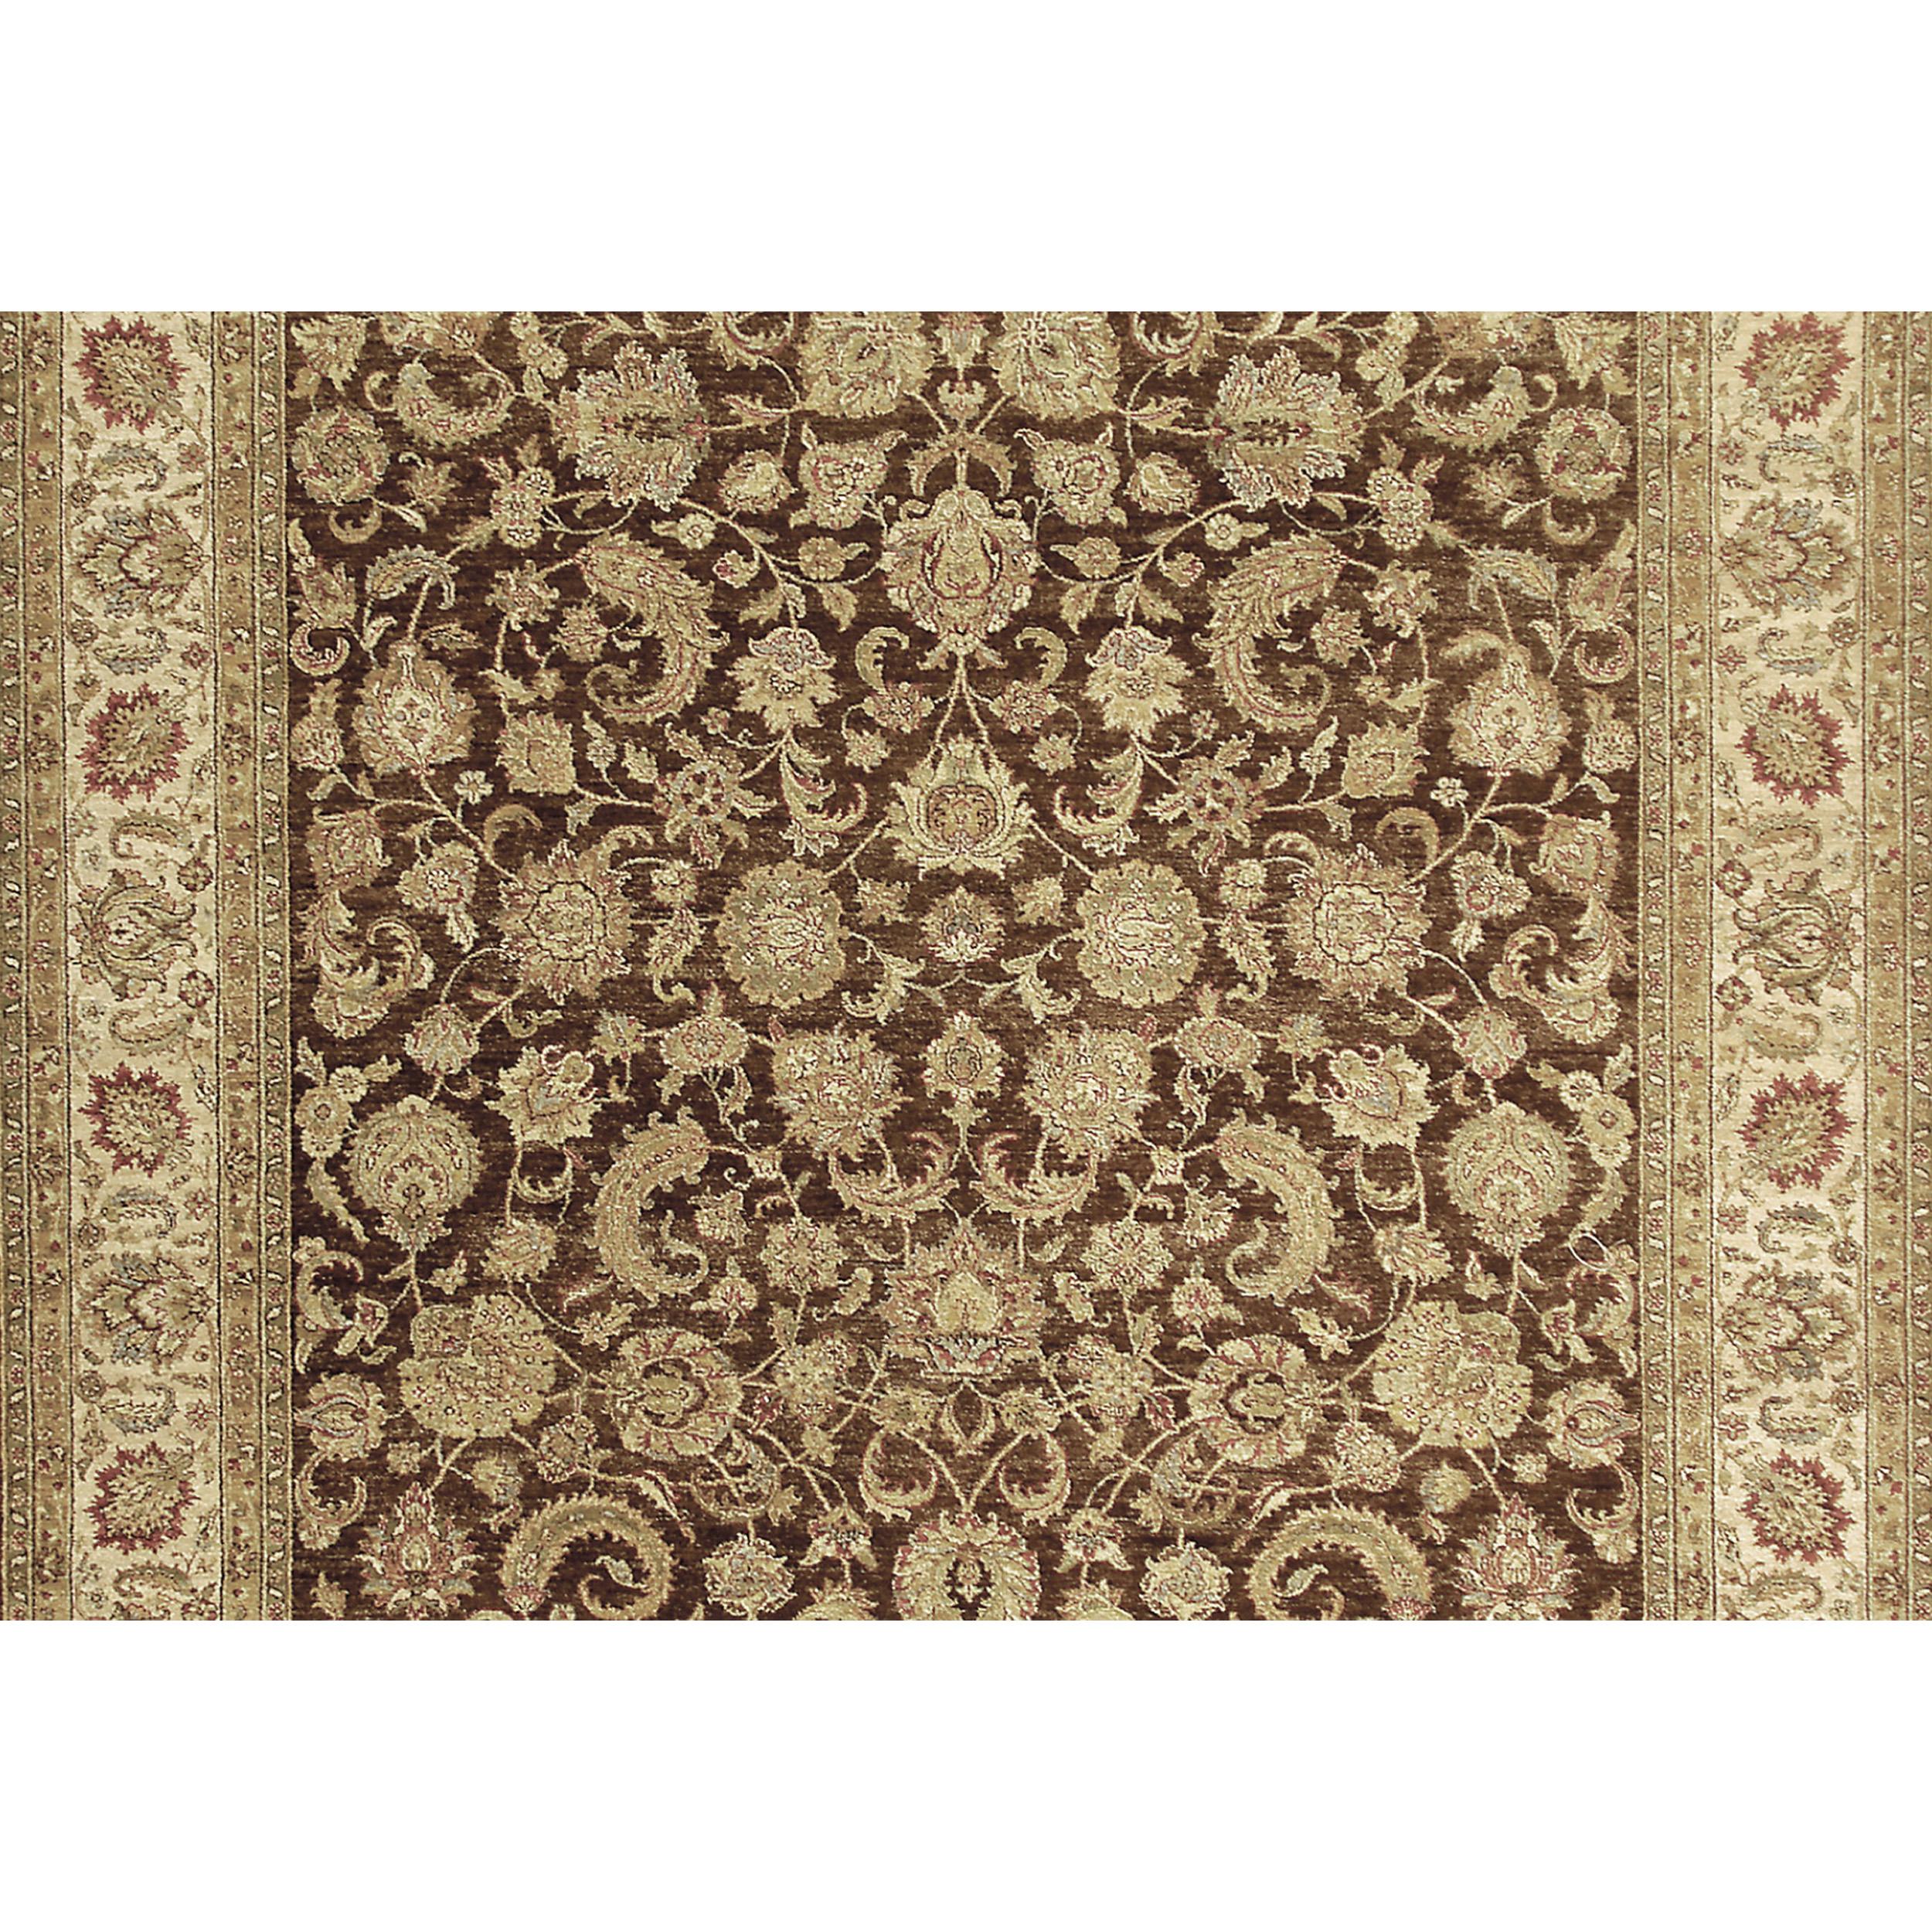 Indian Luxury Traditional Hand-Knotted Brown/Cream 12x15 Rug For Sale